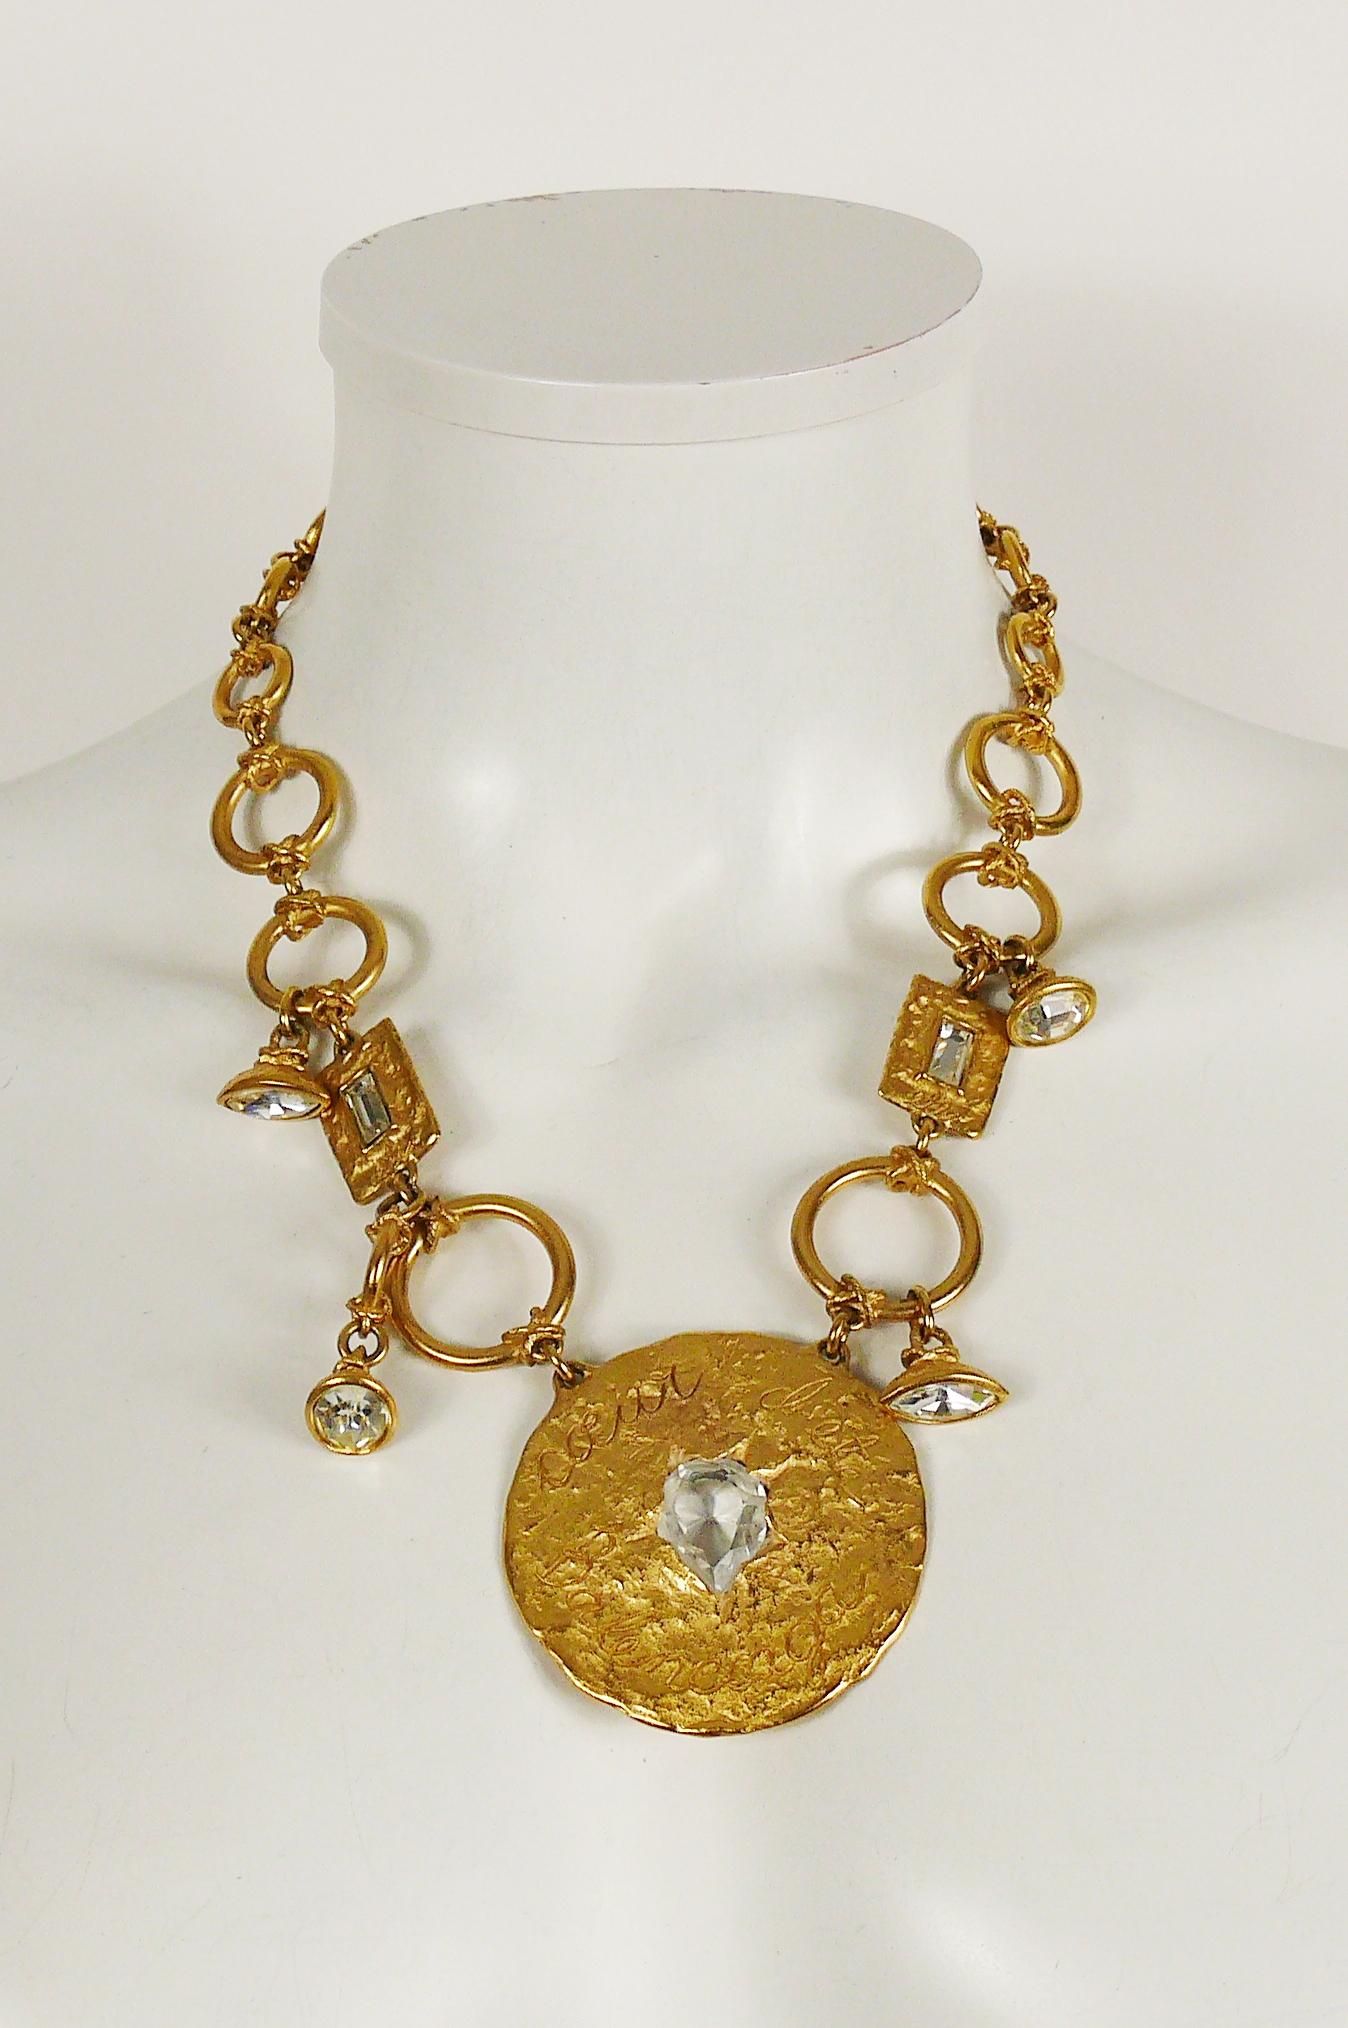 BALENCIAGA vintage gold toned necklace featuring a large textured disc embossed CŒUR D’ÉTÉ BALENCIAGA embellished with clear crystal.

T-bar closure.

Embossed BALENCIAGA Paris.
Made in France.

Indicative measurements : chain length approx. 51.5 cm